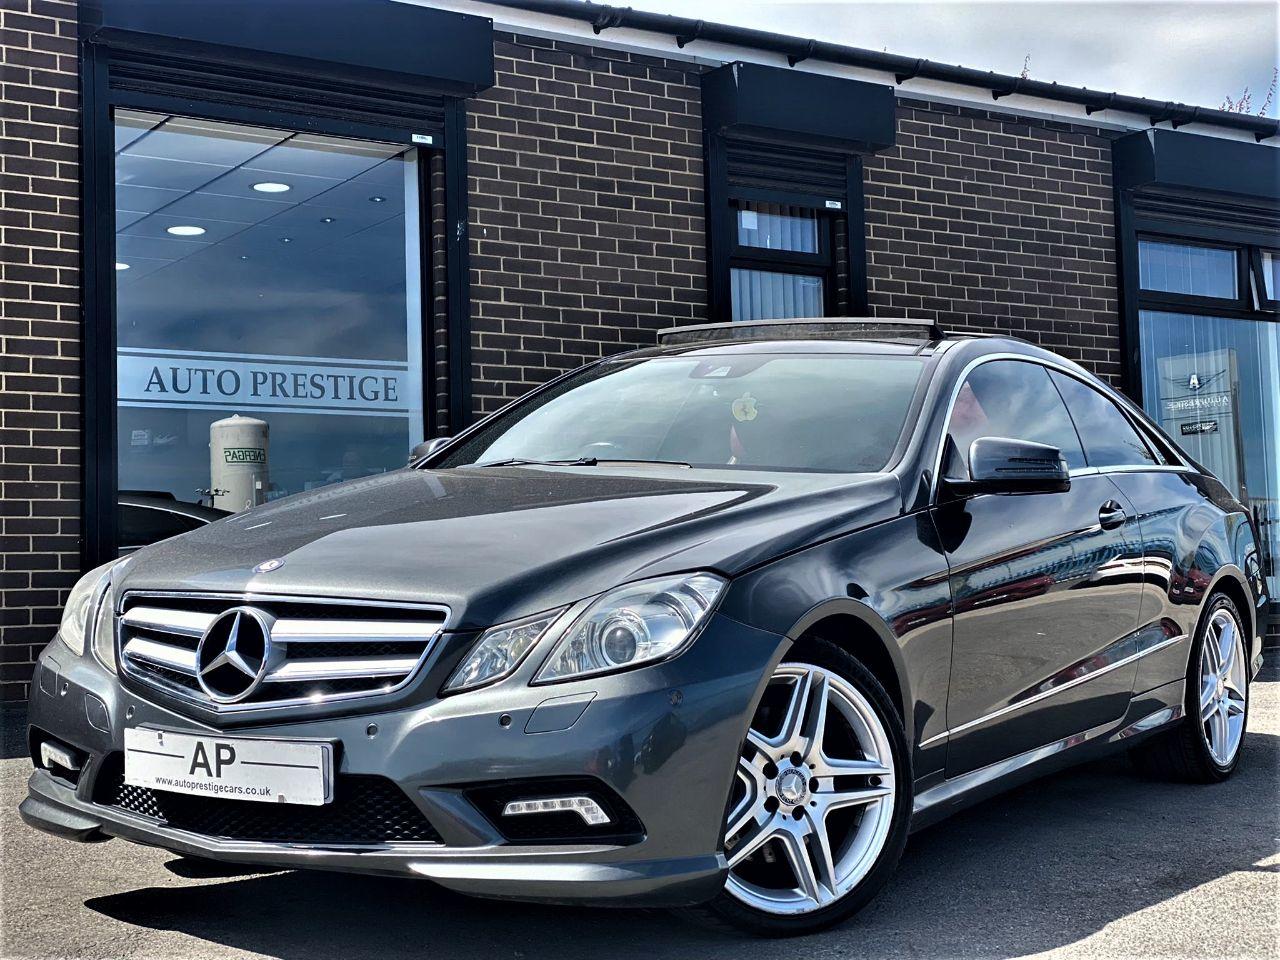 Mercedes-Benz E Class 3.0 E350 CDI BlueEFFICIENCY Sport 2dr Tip Auto PANROOF+MORE VERY CLEAN Coupe Diesel Grey at Autoprestige Bradford